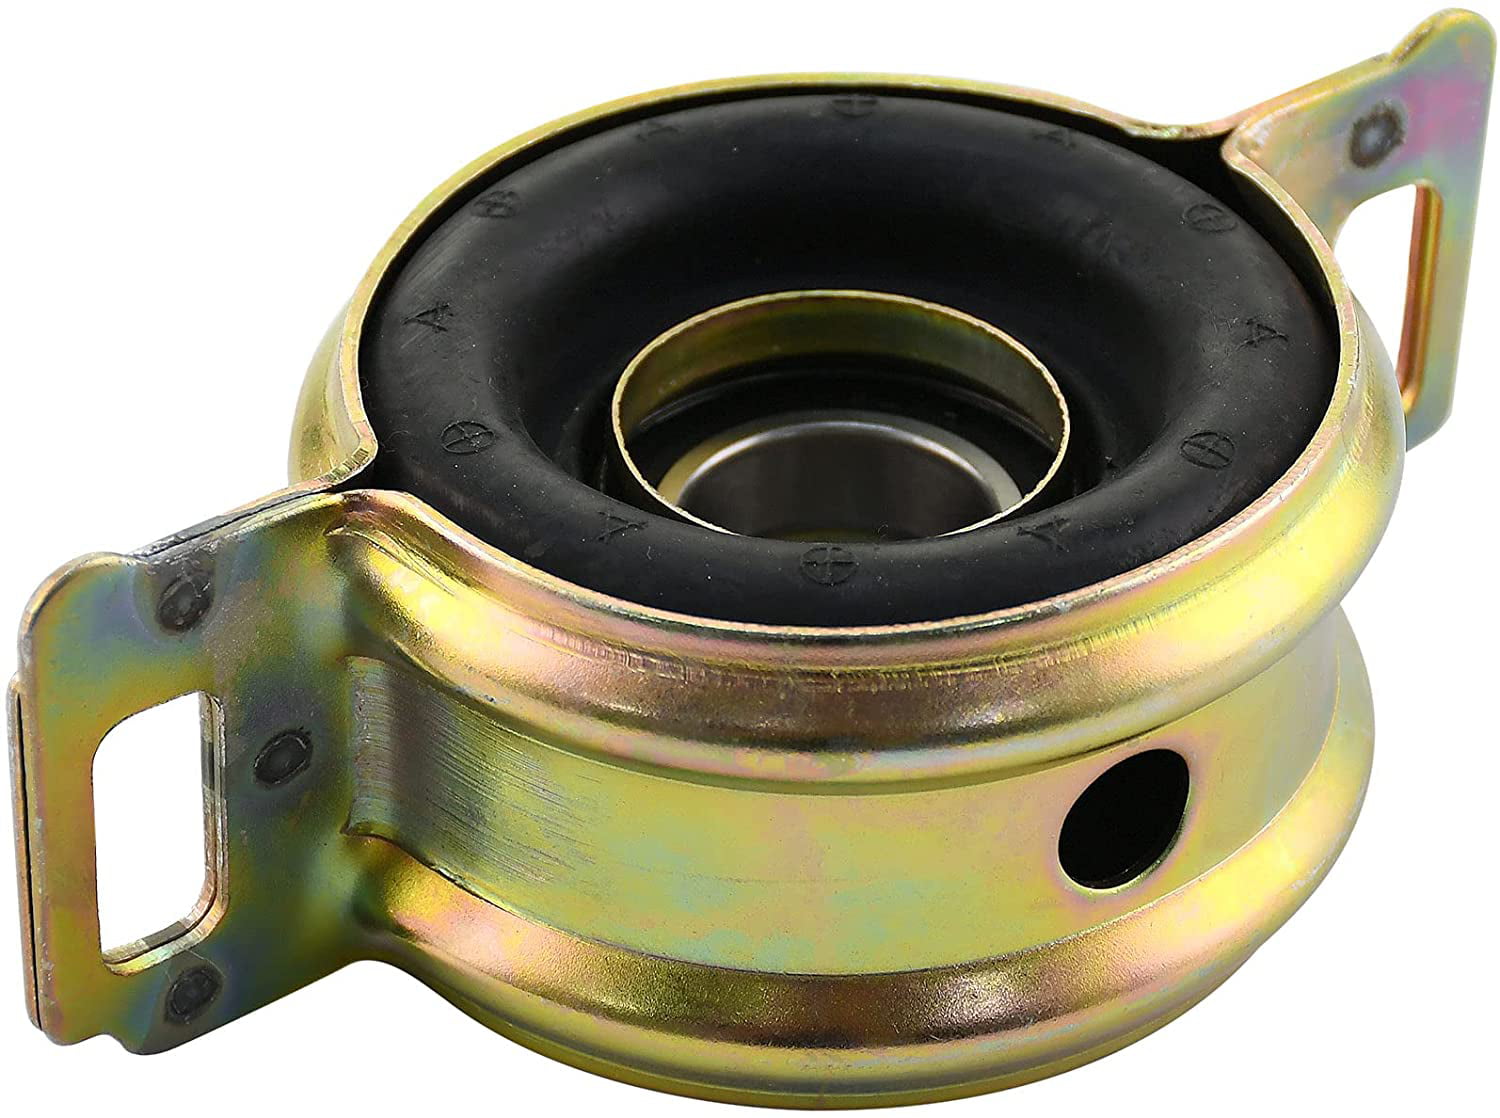 Repalces 3723034010, 3723035120.00, HB26 APDTY 140015 Driveshaft Center Support Bearing Fits RWD Rear Wheel Drive 1993-1998 Toyota T100 1995-2004 Tacoma 2000-2006 Tundra 